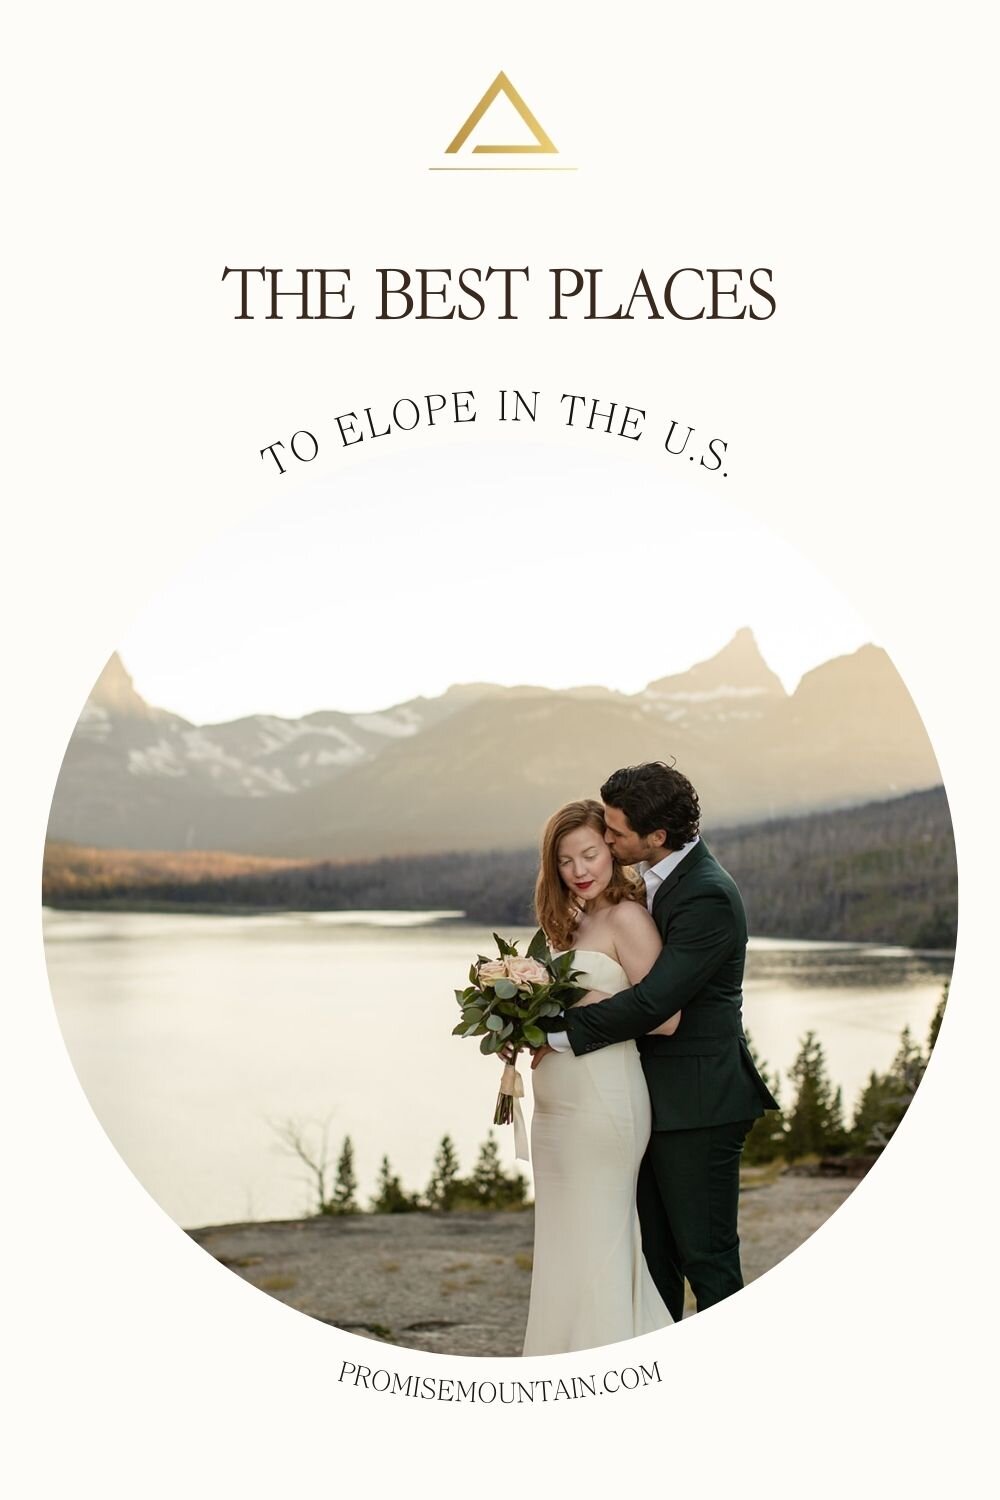 Bride and groom posing in front of a picturesque mountain view; image overlaid with text that reads The Best Places to Elope in The U.S.